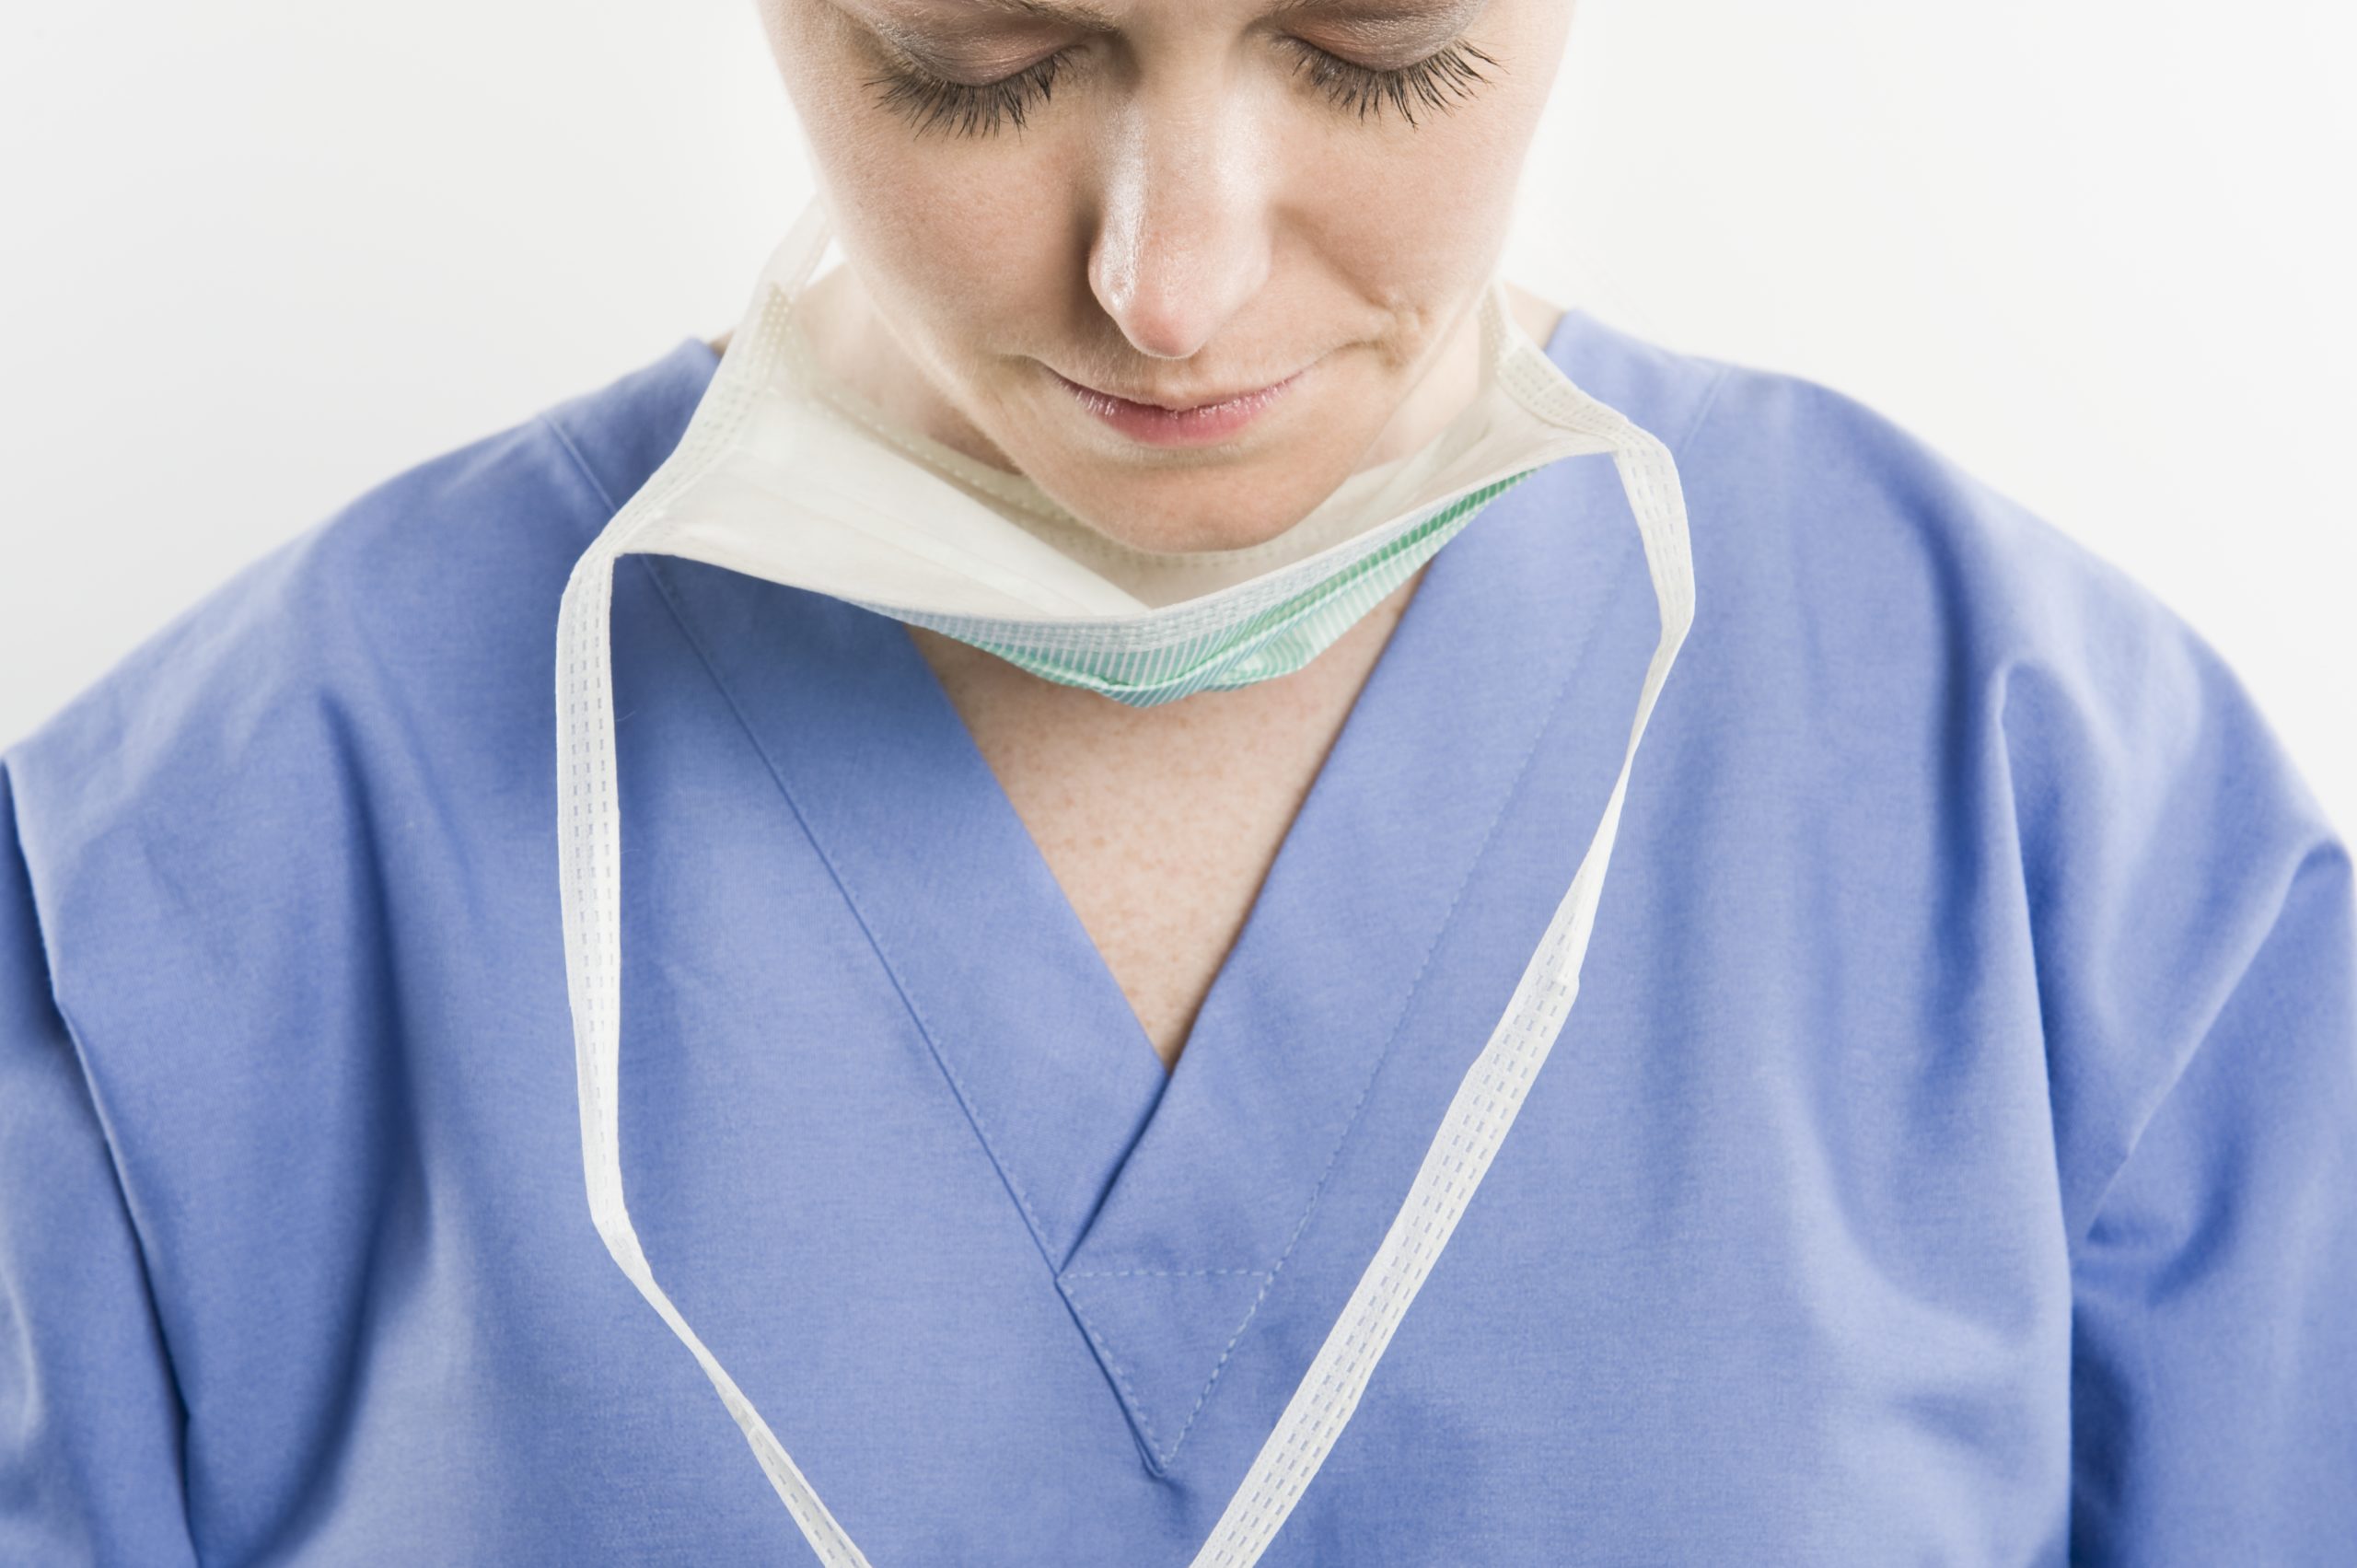 10 Most Common Career Change for Nurses